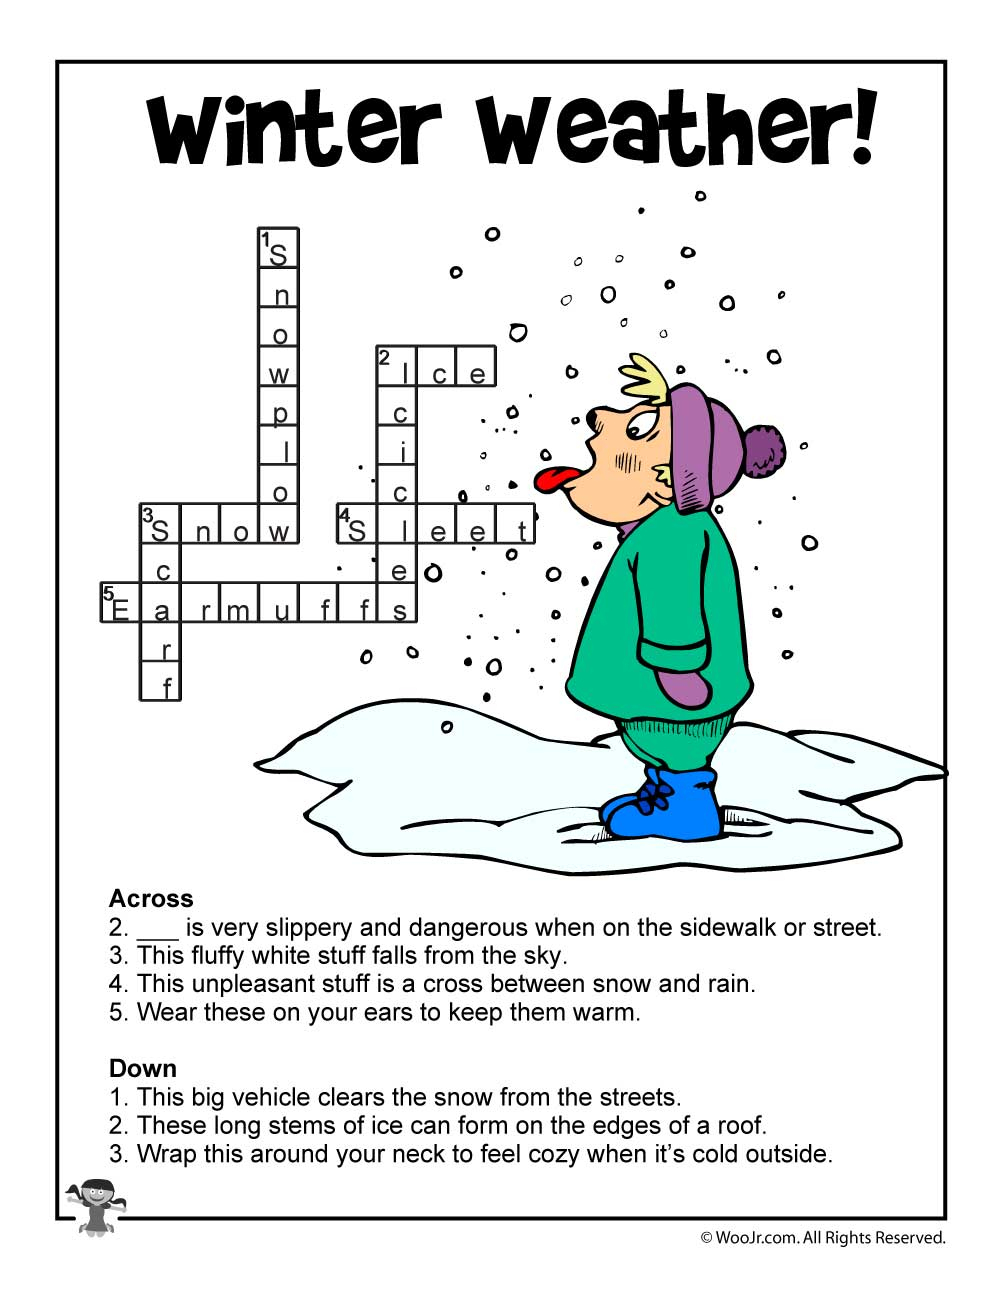 Winter Weather Crossword Puzzle Answer Key | Woo! Jr. Kids Activities - Winter Crossword Puzzle Printable